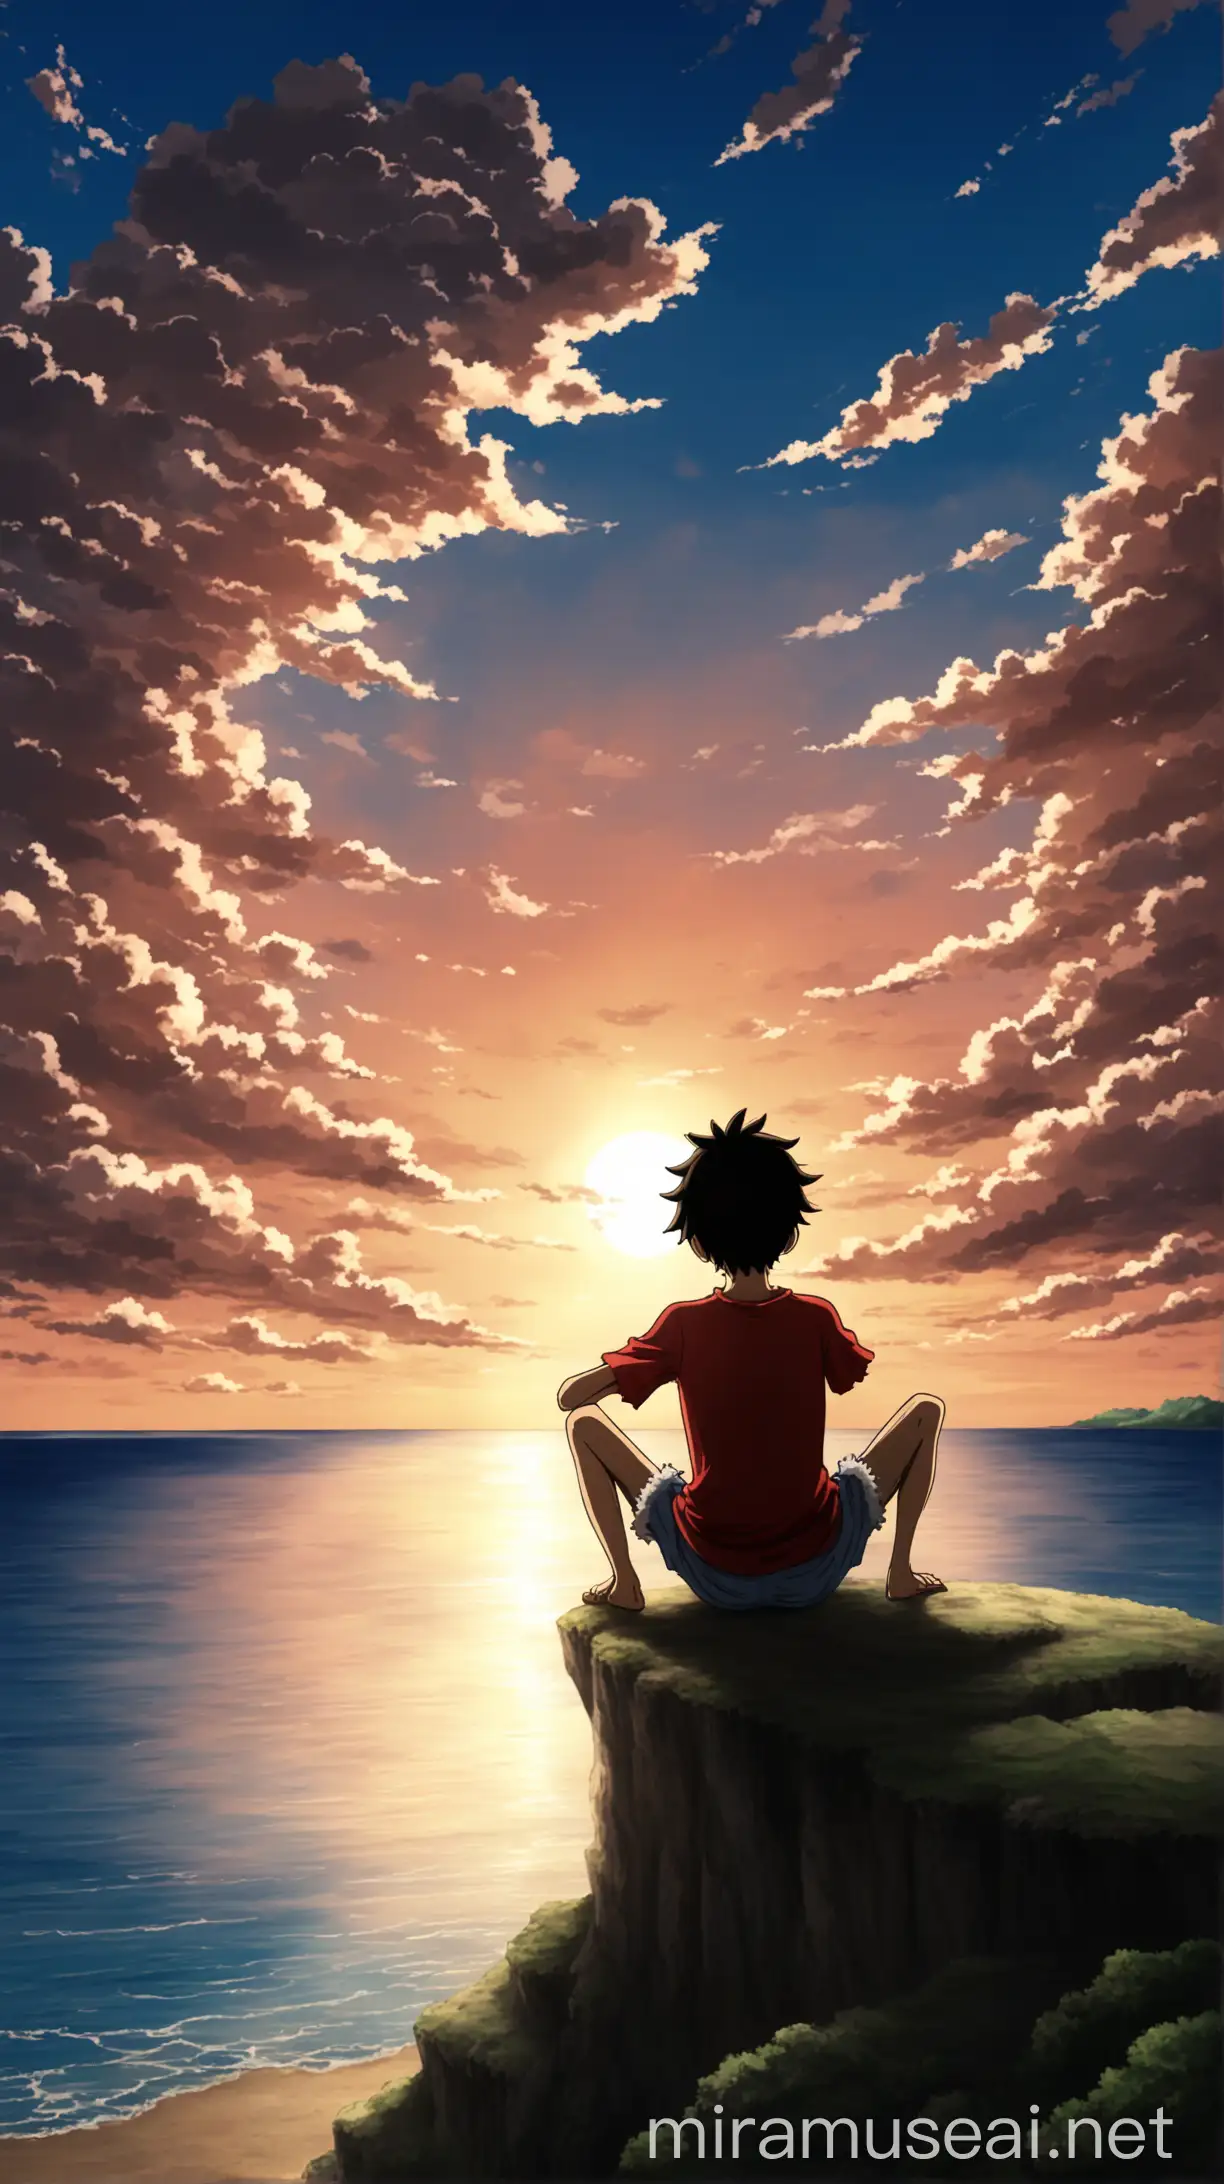 Luffy Sitting by the Seaside with Pretty Clouds